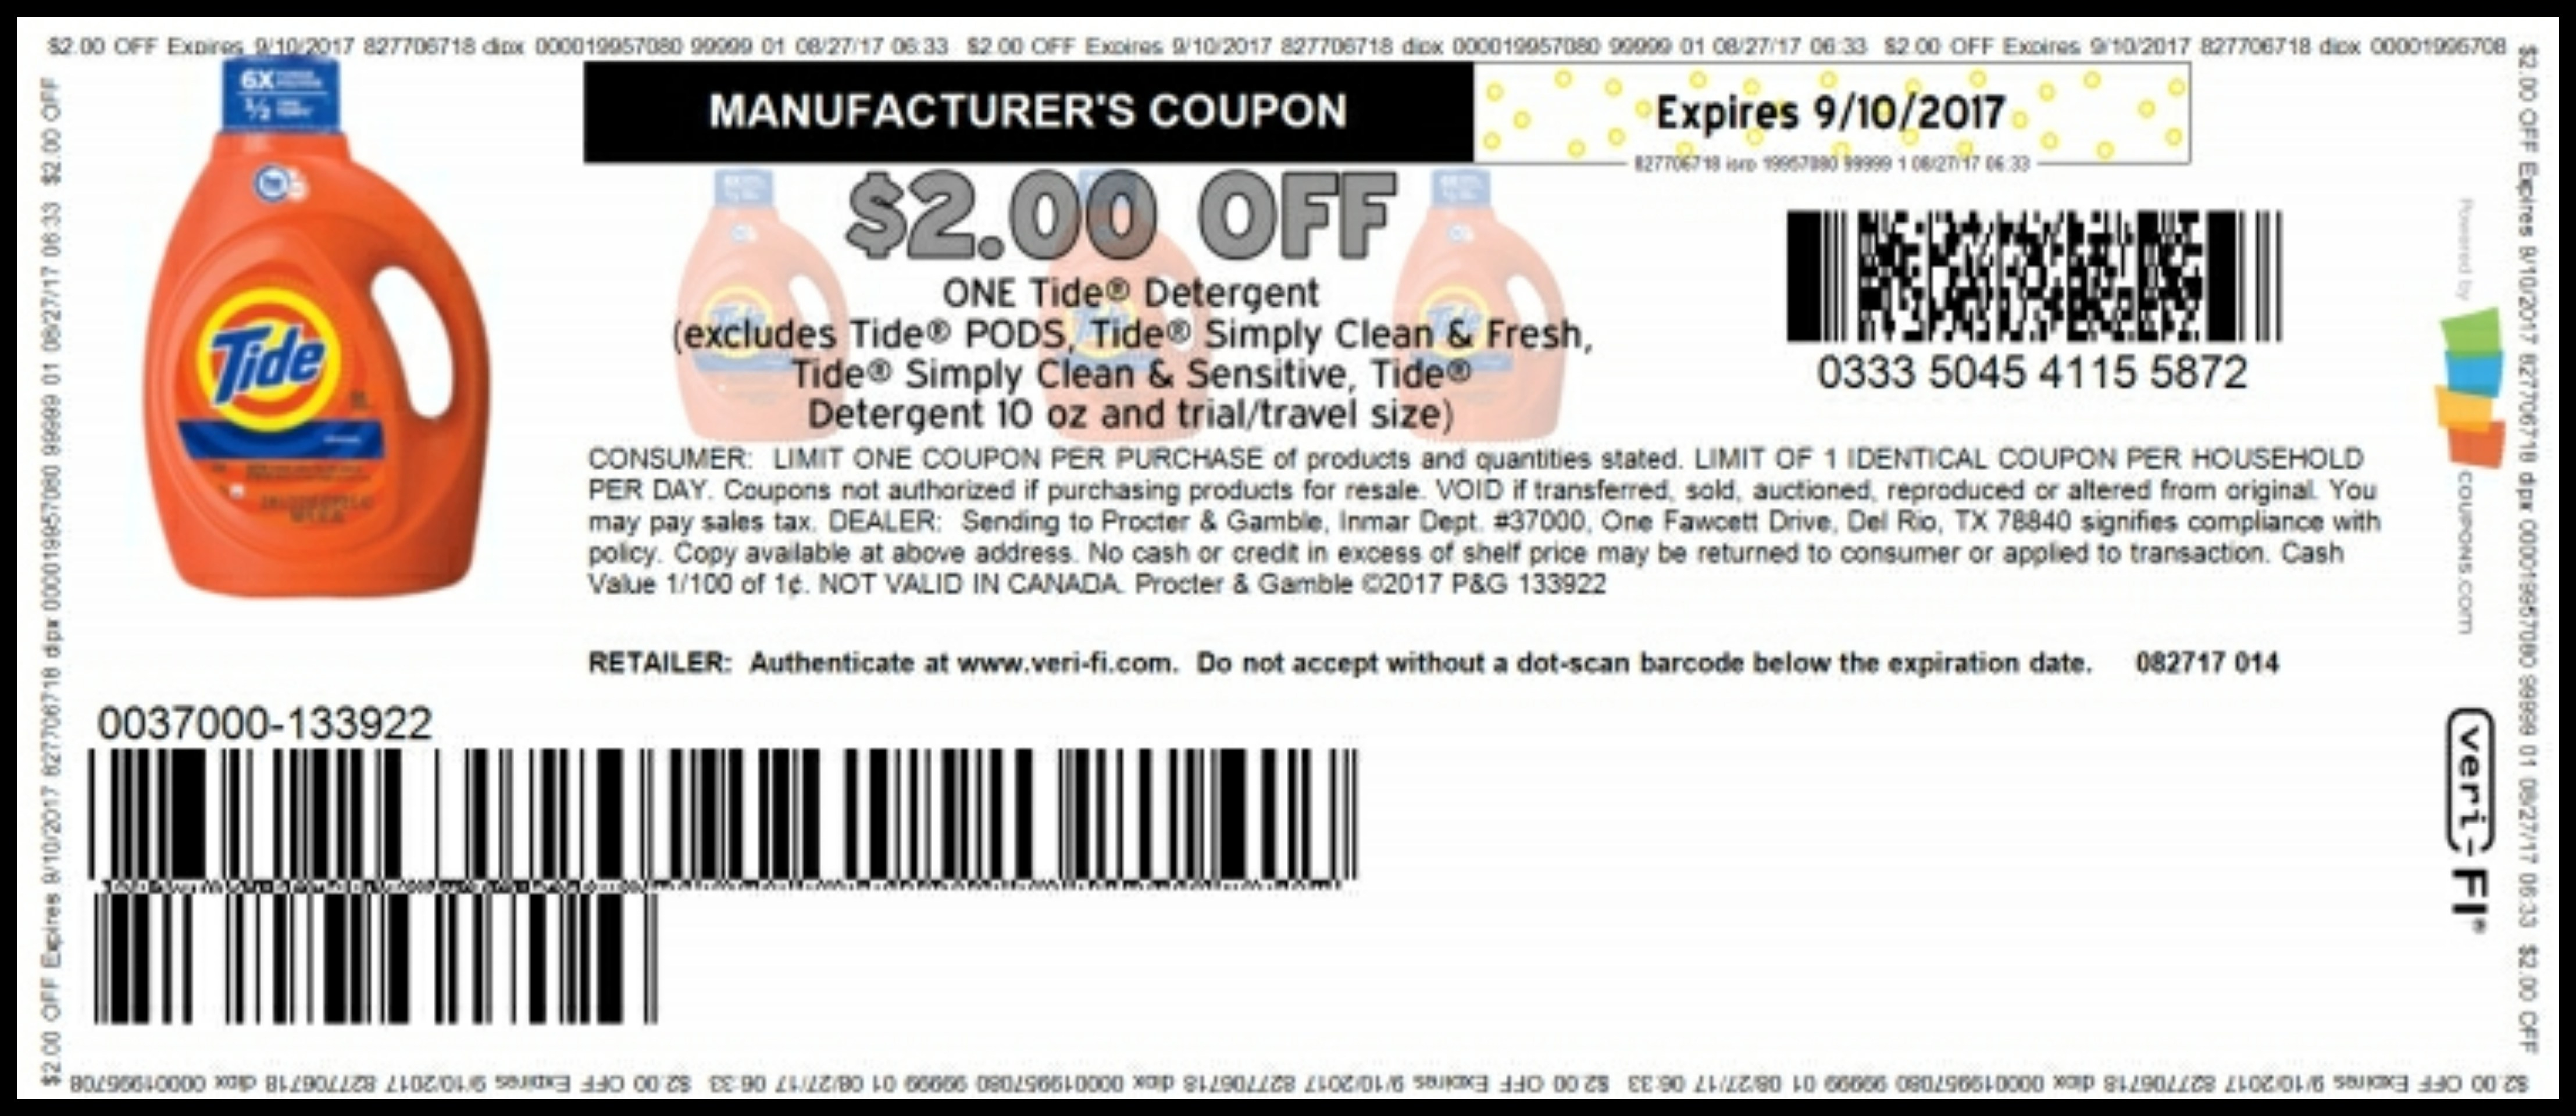 Uncategorized Archives - Cfl Coupon Moms - Free Printable Chinet Coupons